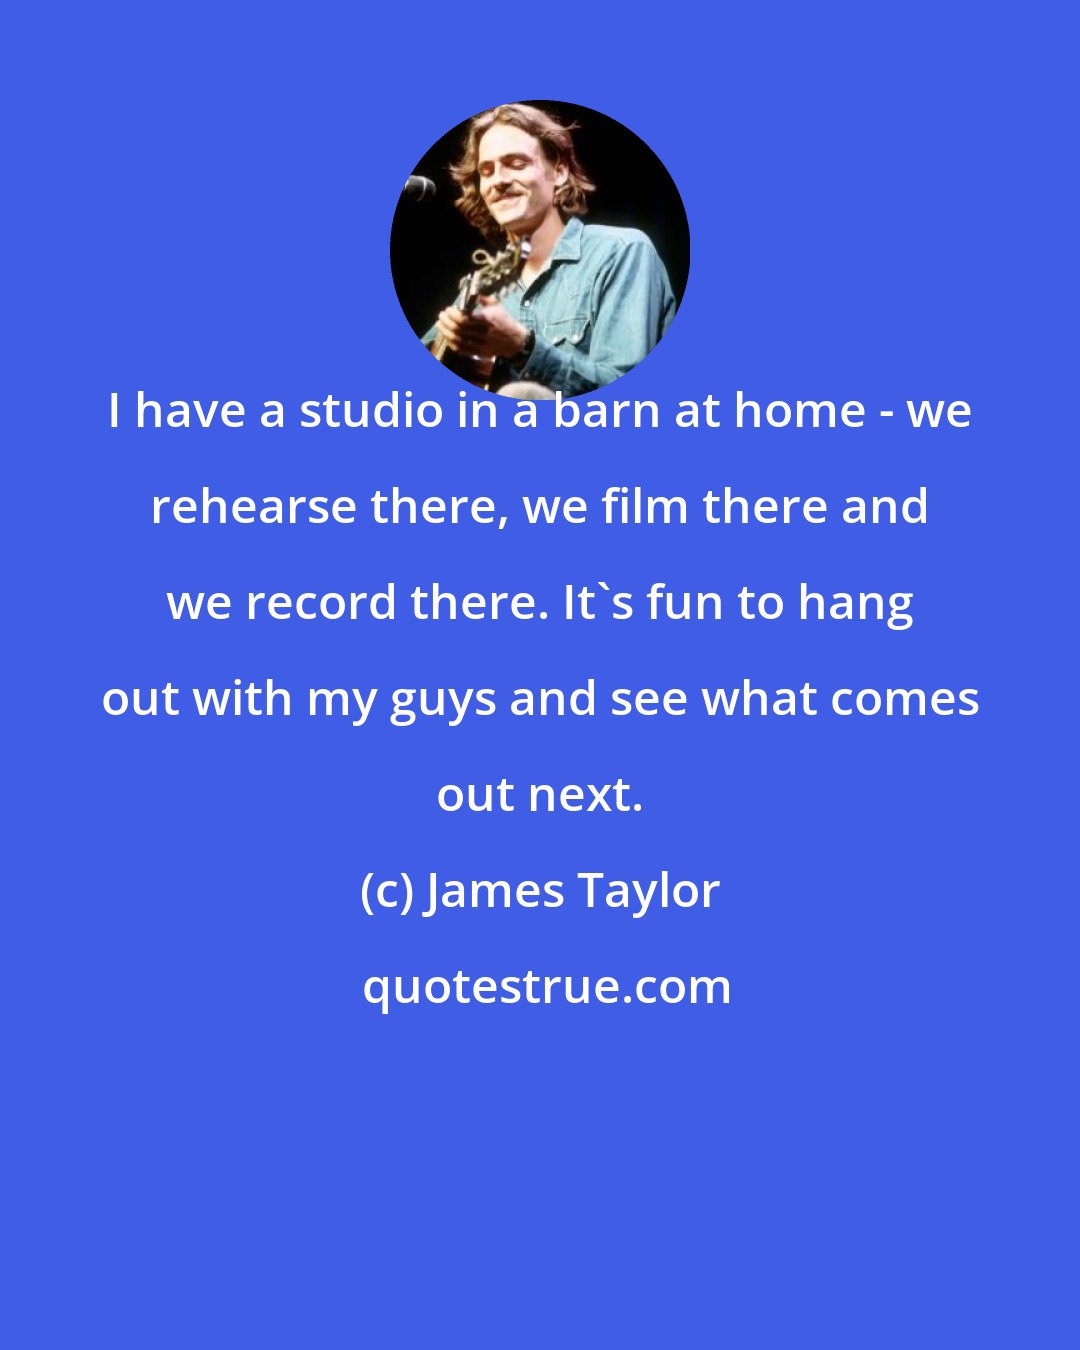 James Taylor: I have a studio in a barn at home - we rehearse there, we film there and we record there. It's fun to hang out with my guys and see what comes out next.